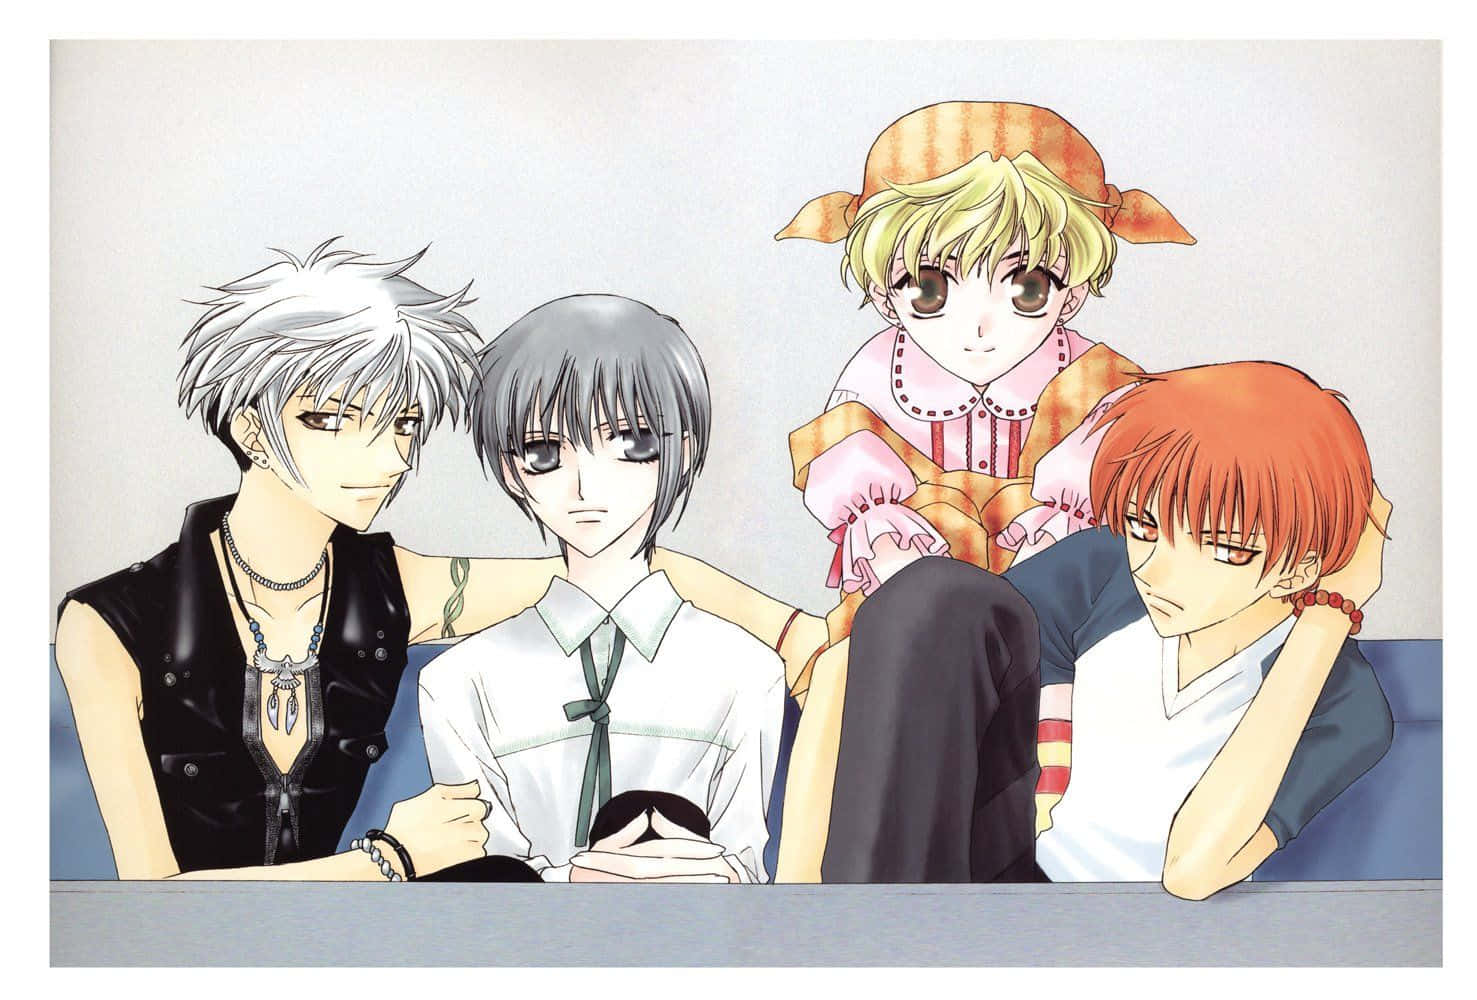 Download Shigure Sohma, The Mysterious Novelist From Fruits Basket ...